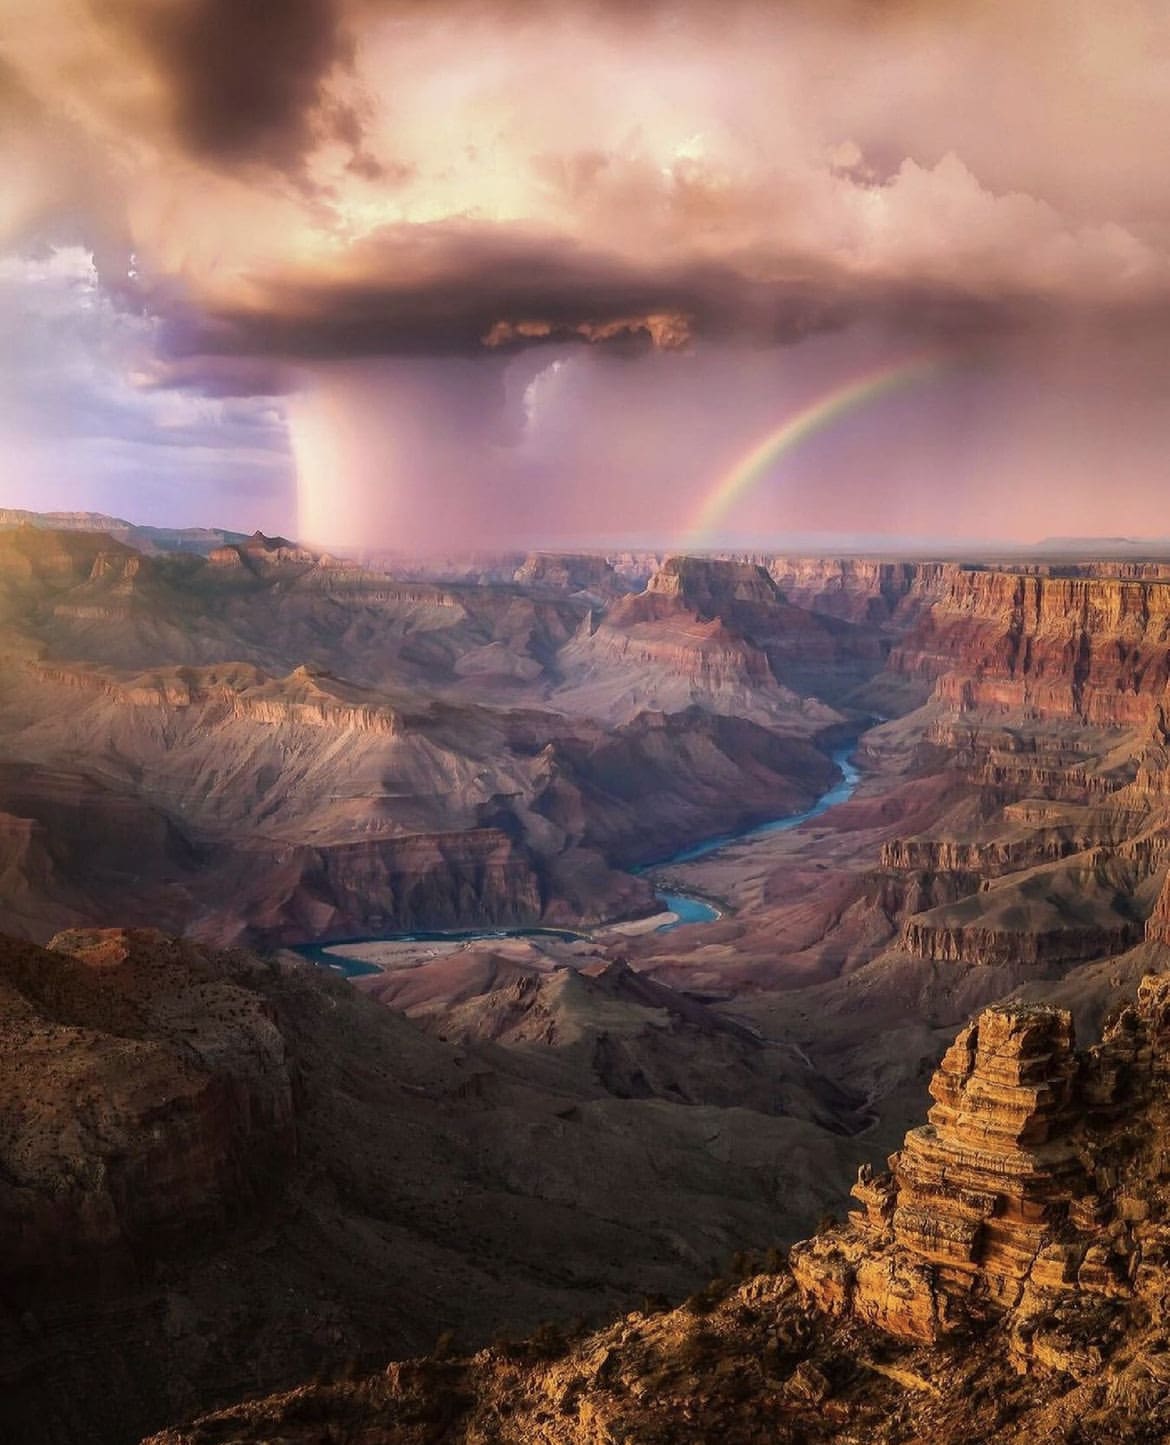 Sunset and rainbows over the Grand Canyon